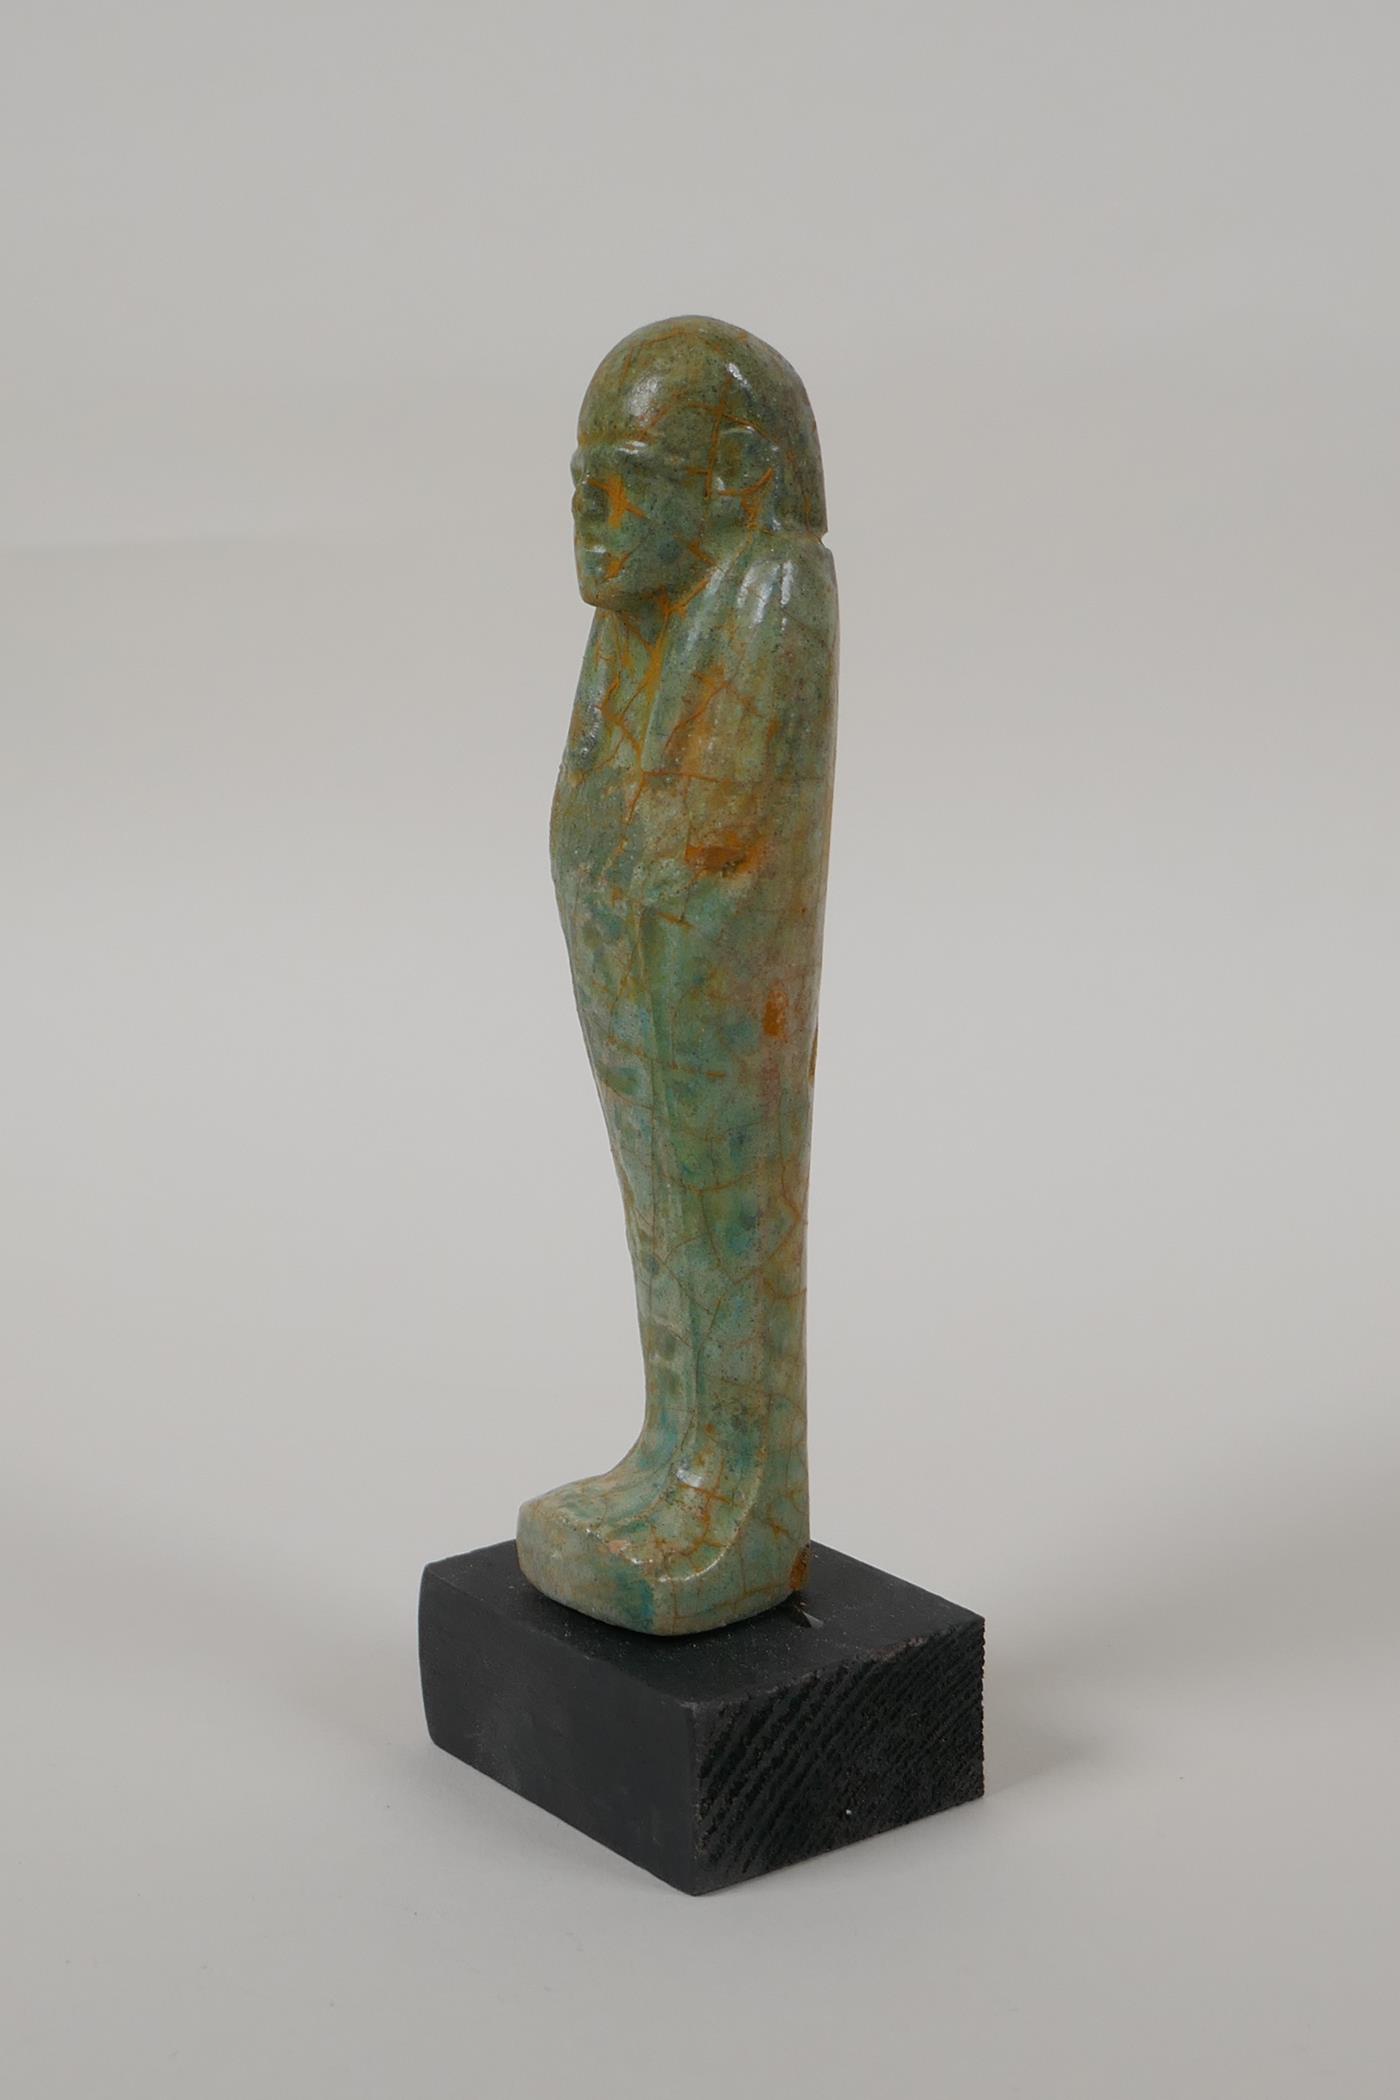 An Egyptian turquoise glazed faience shabti, mounted on a display base, 6" high - Image 4 of 4